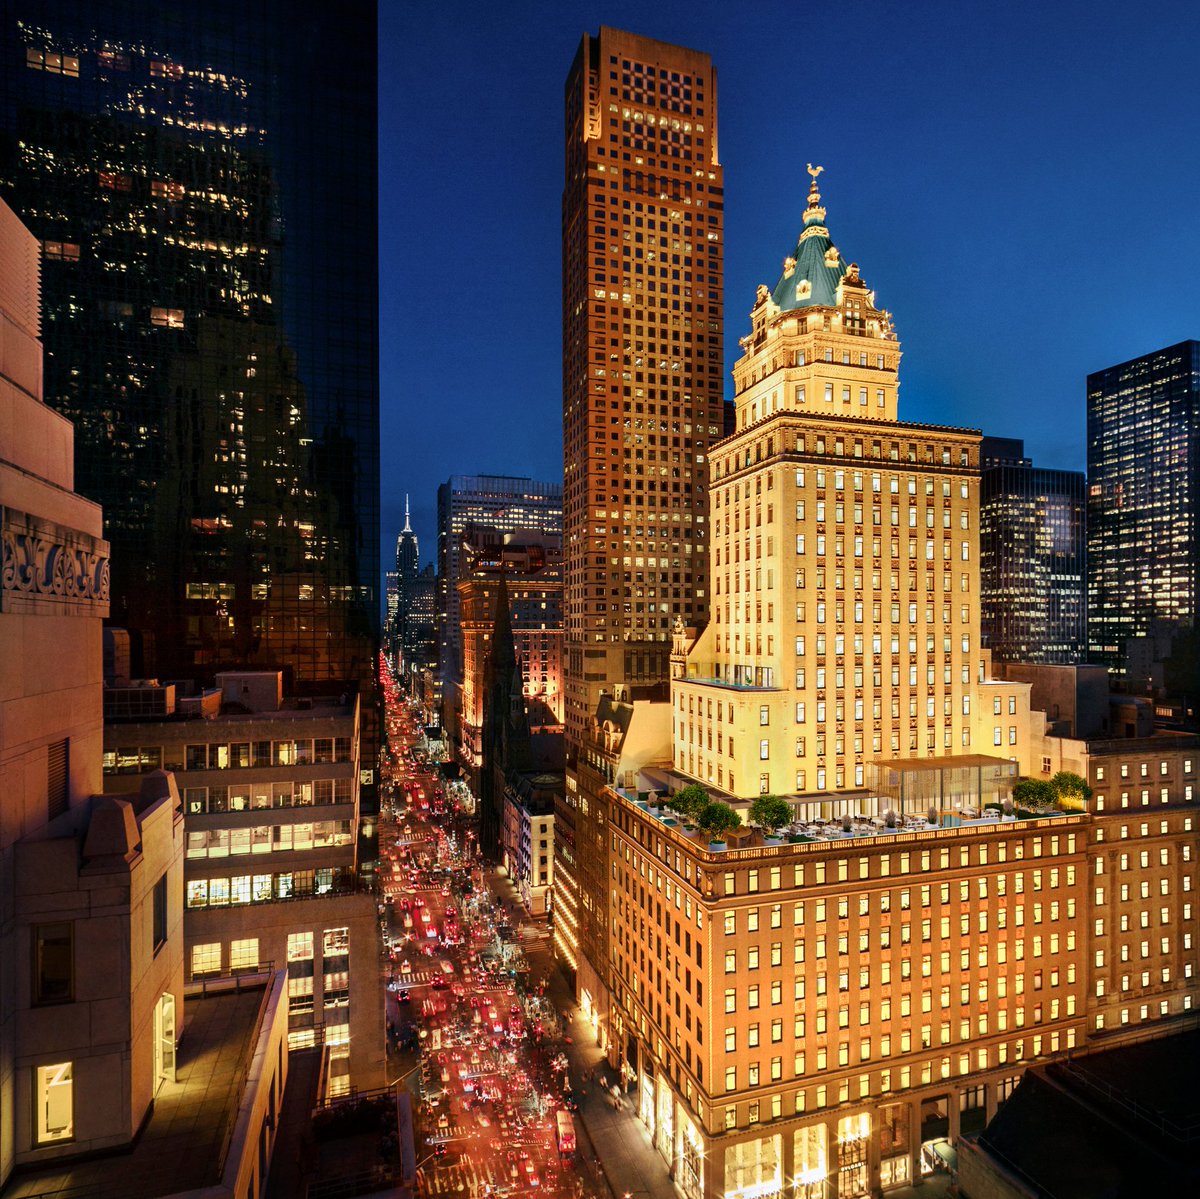 Looking to 2020, in #Manhattan, #Aman’s 2nd urban sanctuary will blend vibrant #NewYork with the calming soul of Aman. #AmanNewYork's 83 guest rooms & suites, & the first urban Aman Residences will occupy the iconic #CrownBuilding aman.com/resorts/aman-n… #Aman30 #AmanCelebrations